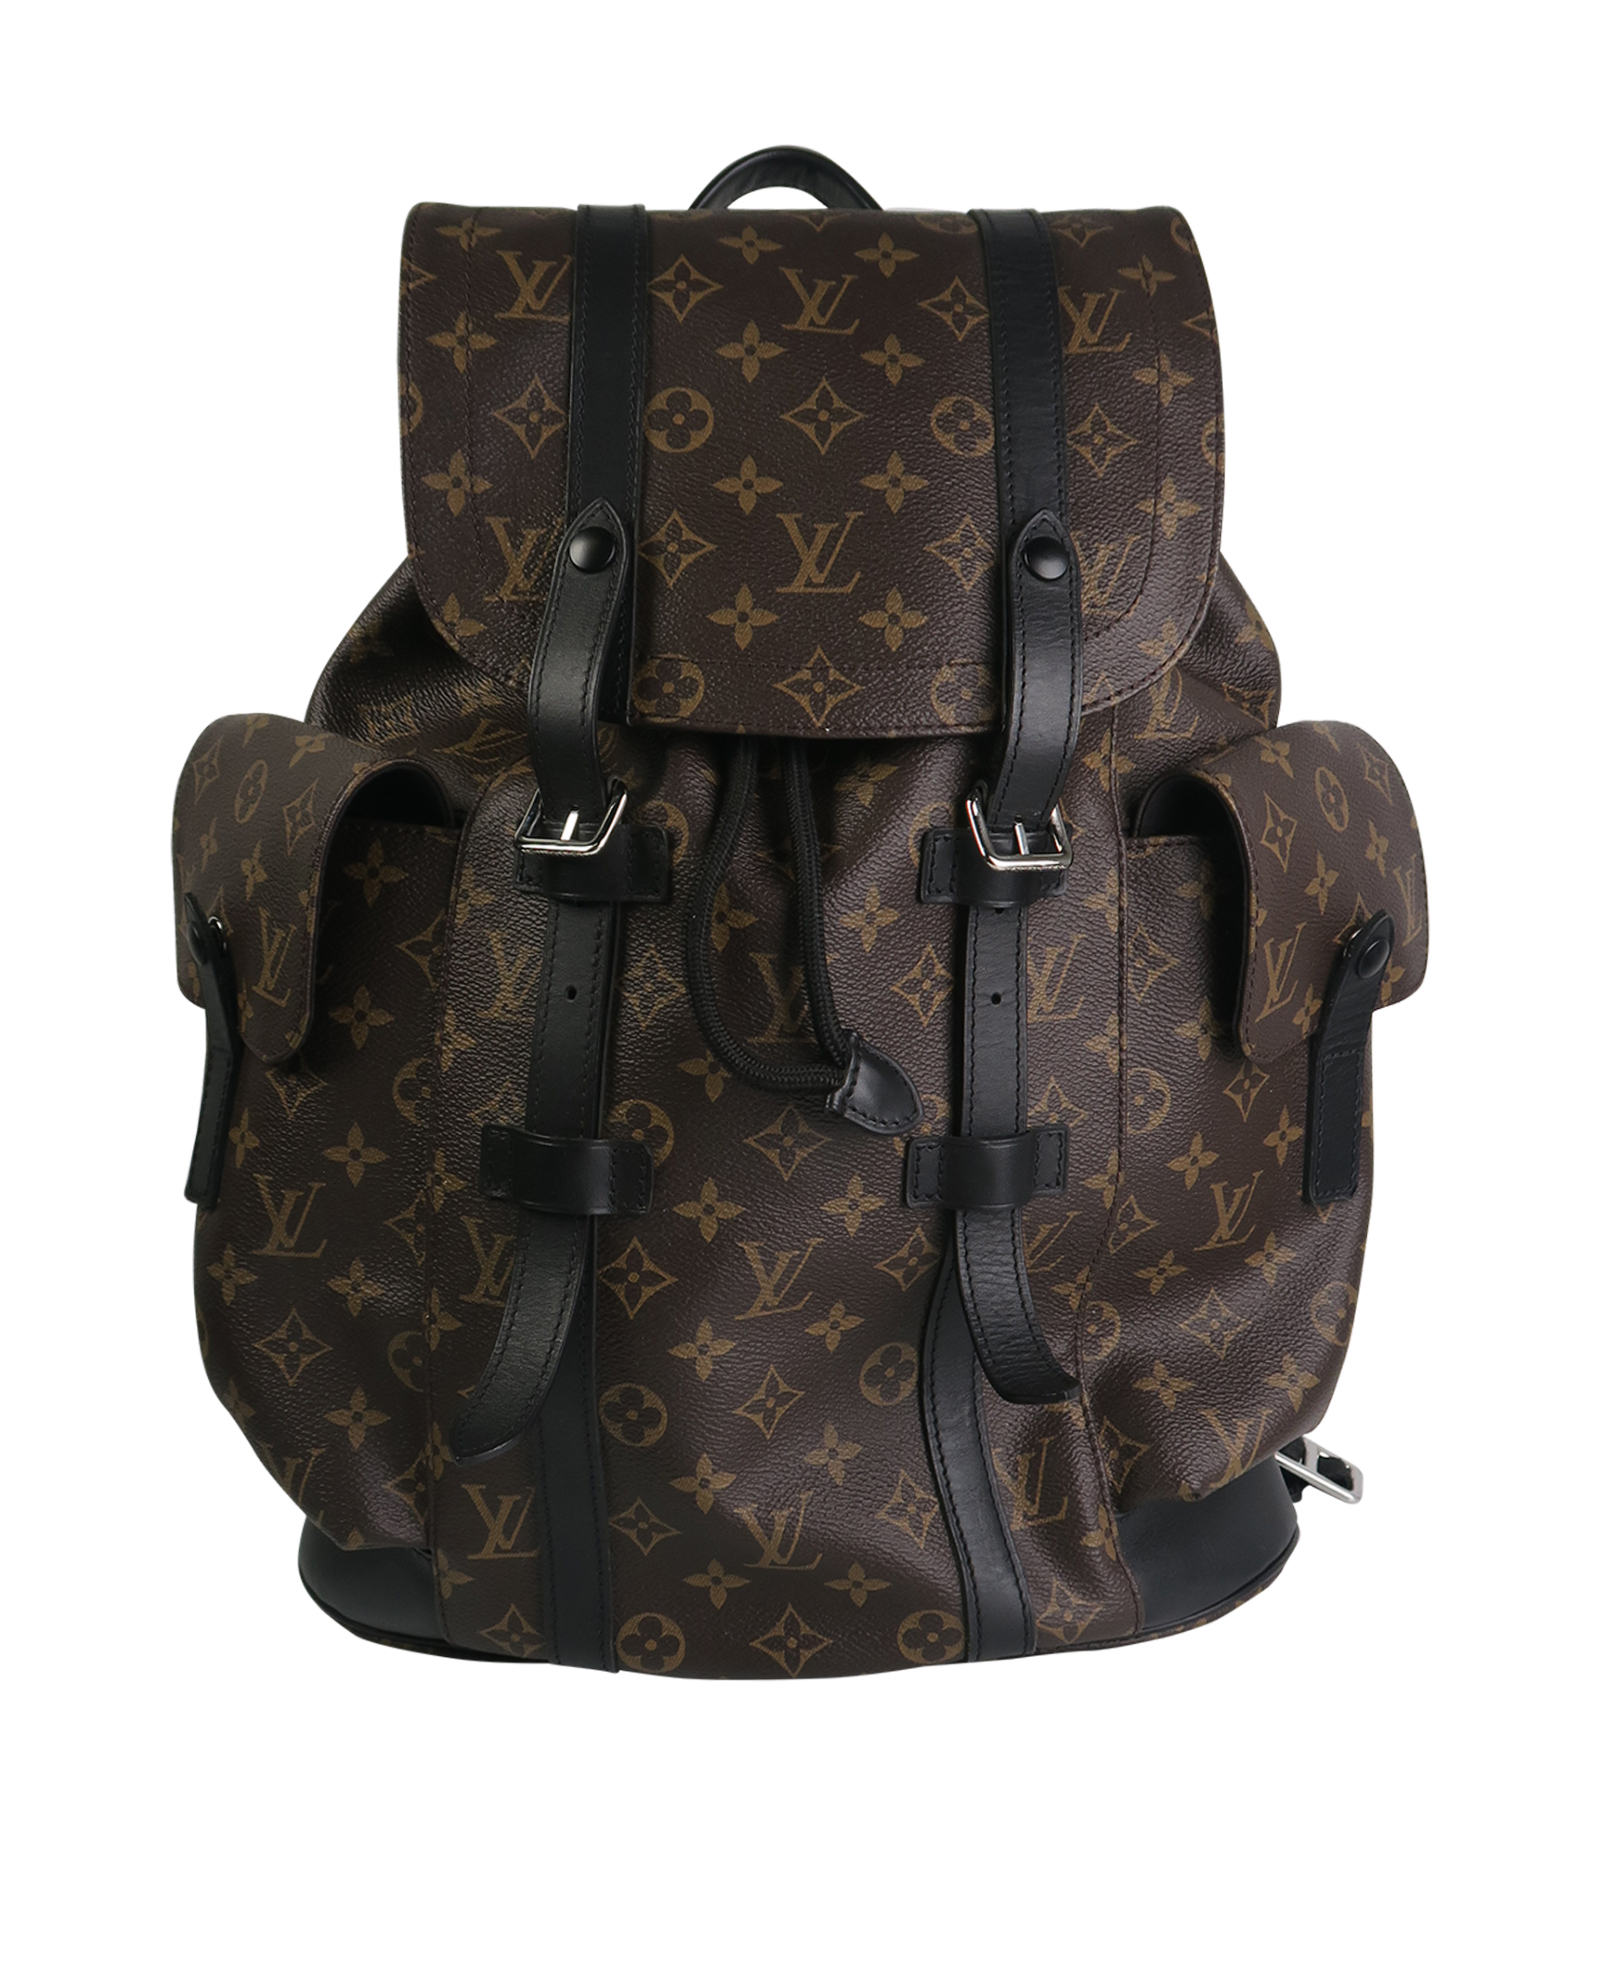 Designer Exchange Ltd - Looking for a spacious LV Backpack? The